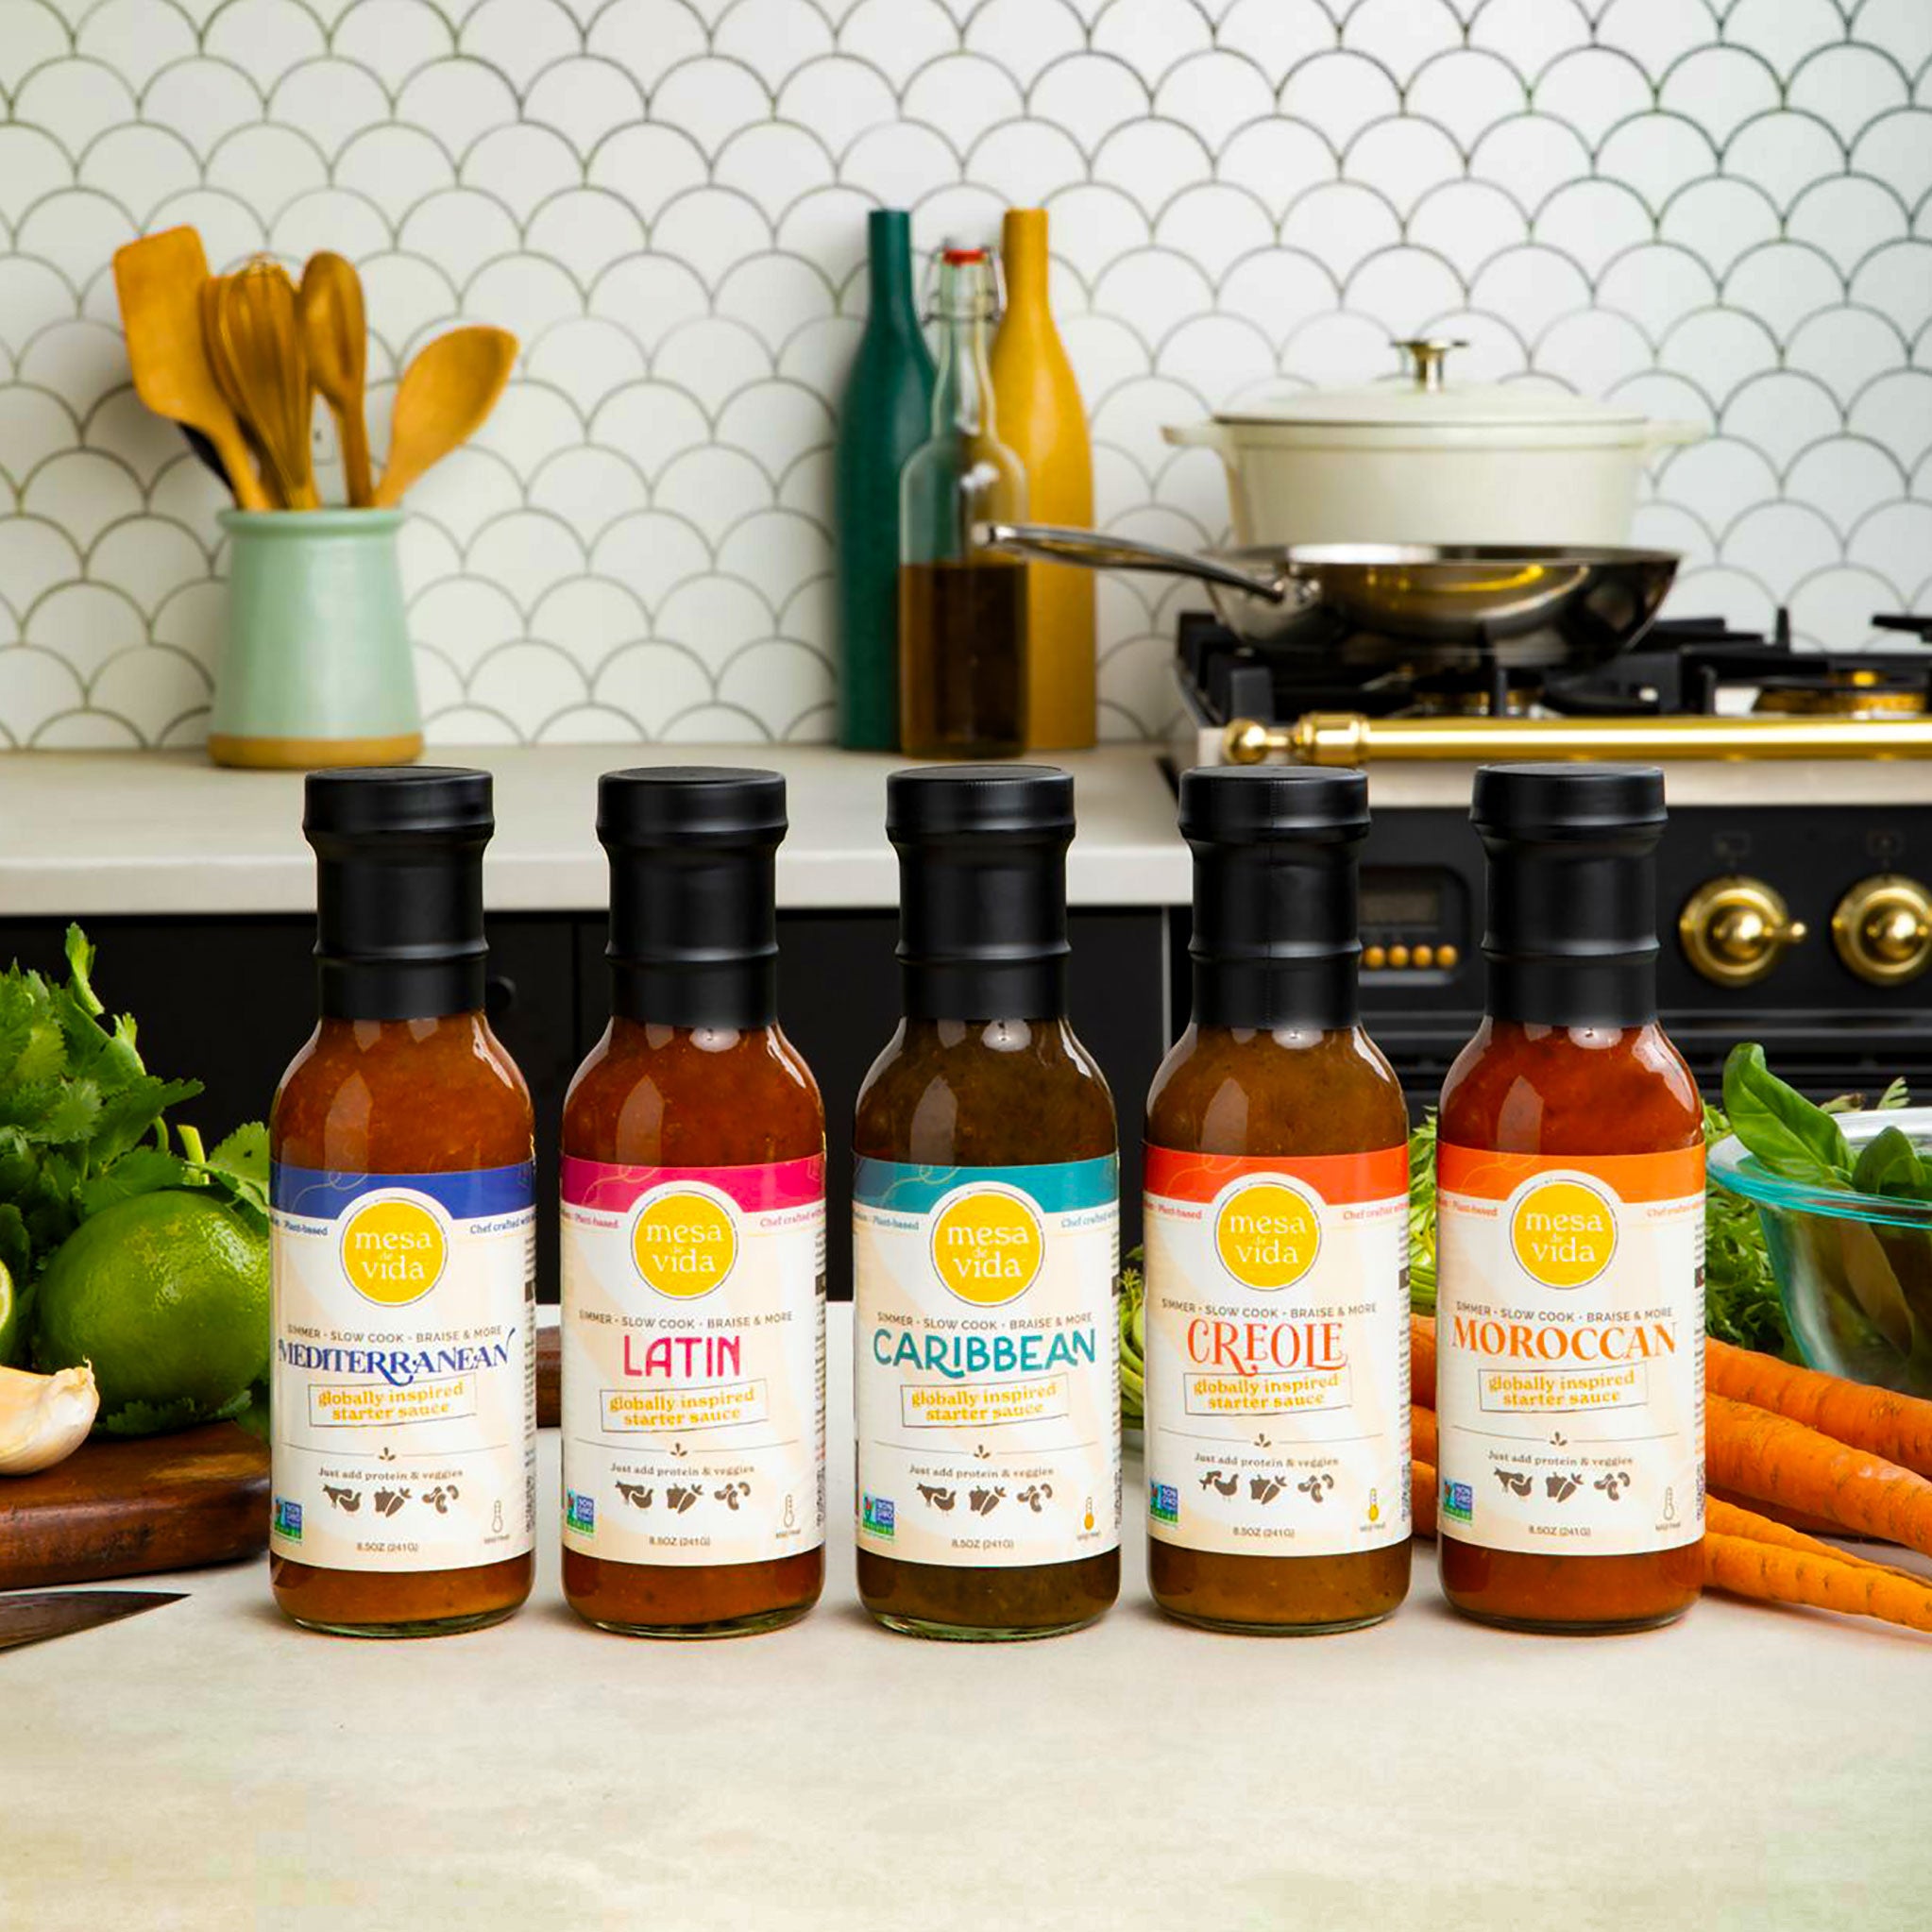 Chief Green Seasoning - Shop Specialty Sauces at H-E-B